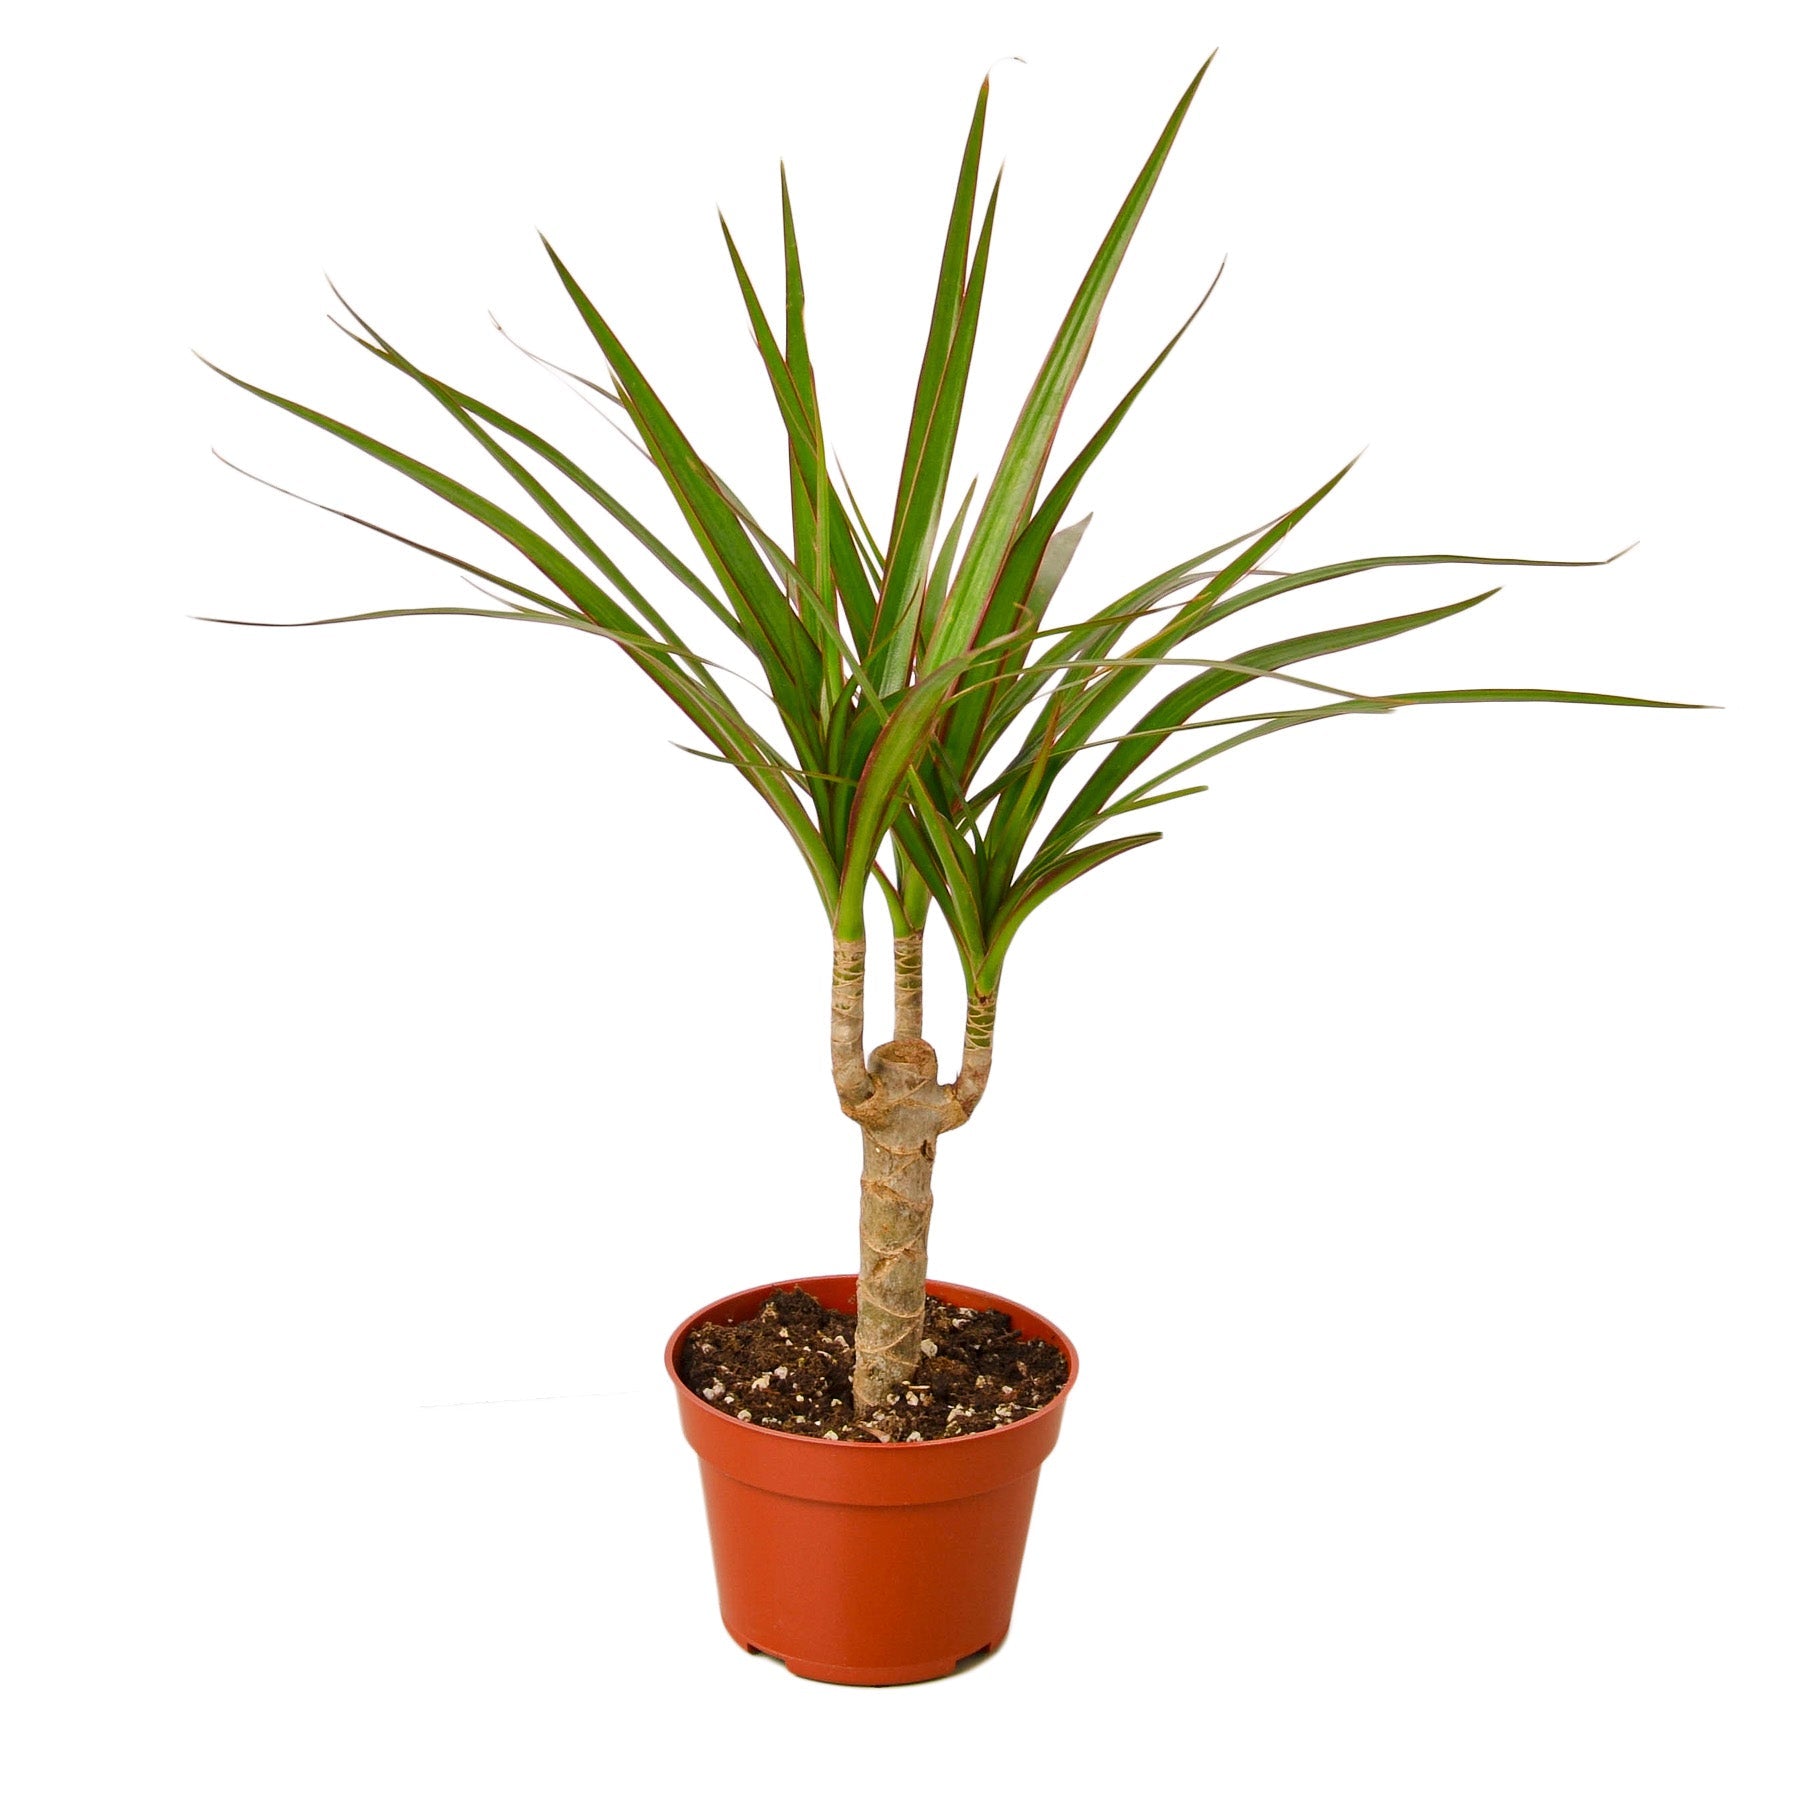 A potted palm tree on a white background.